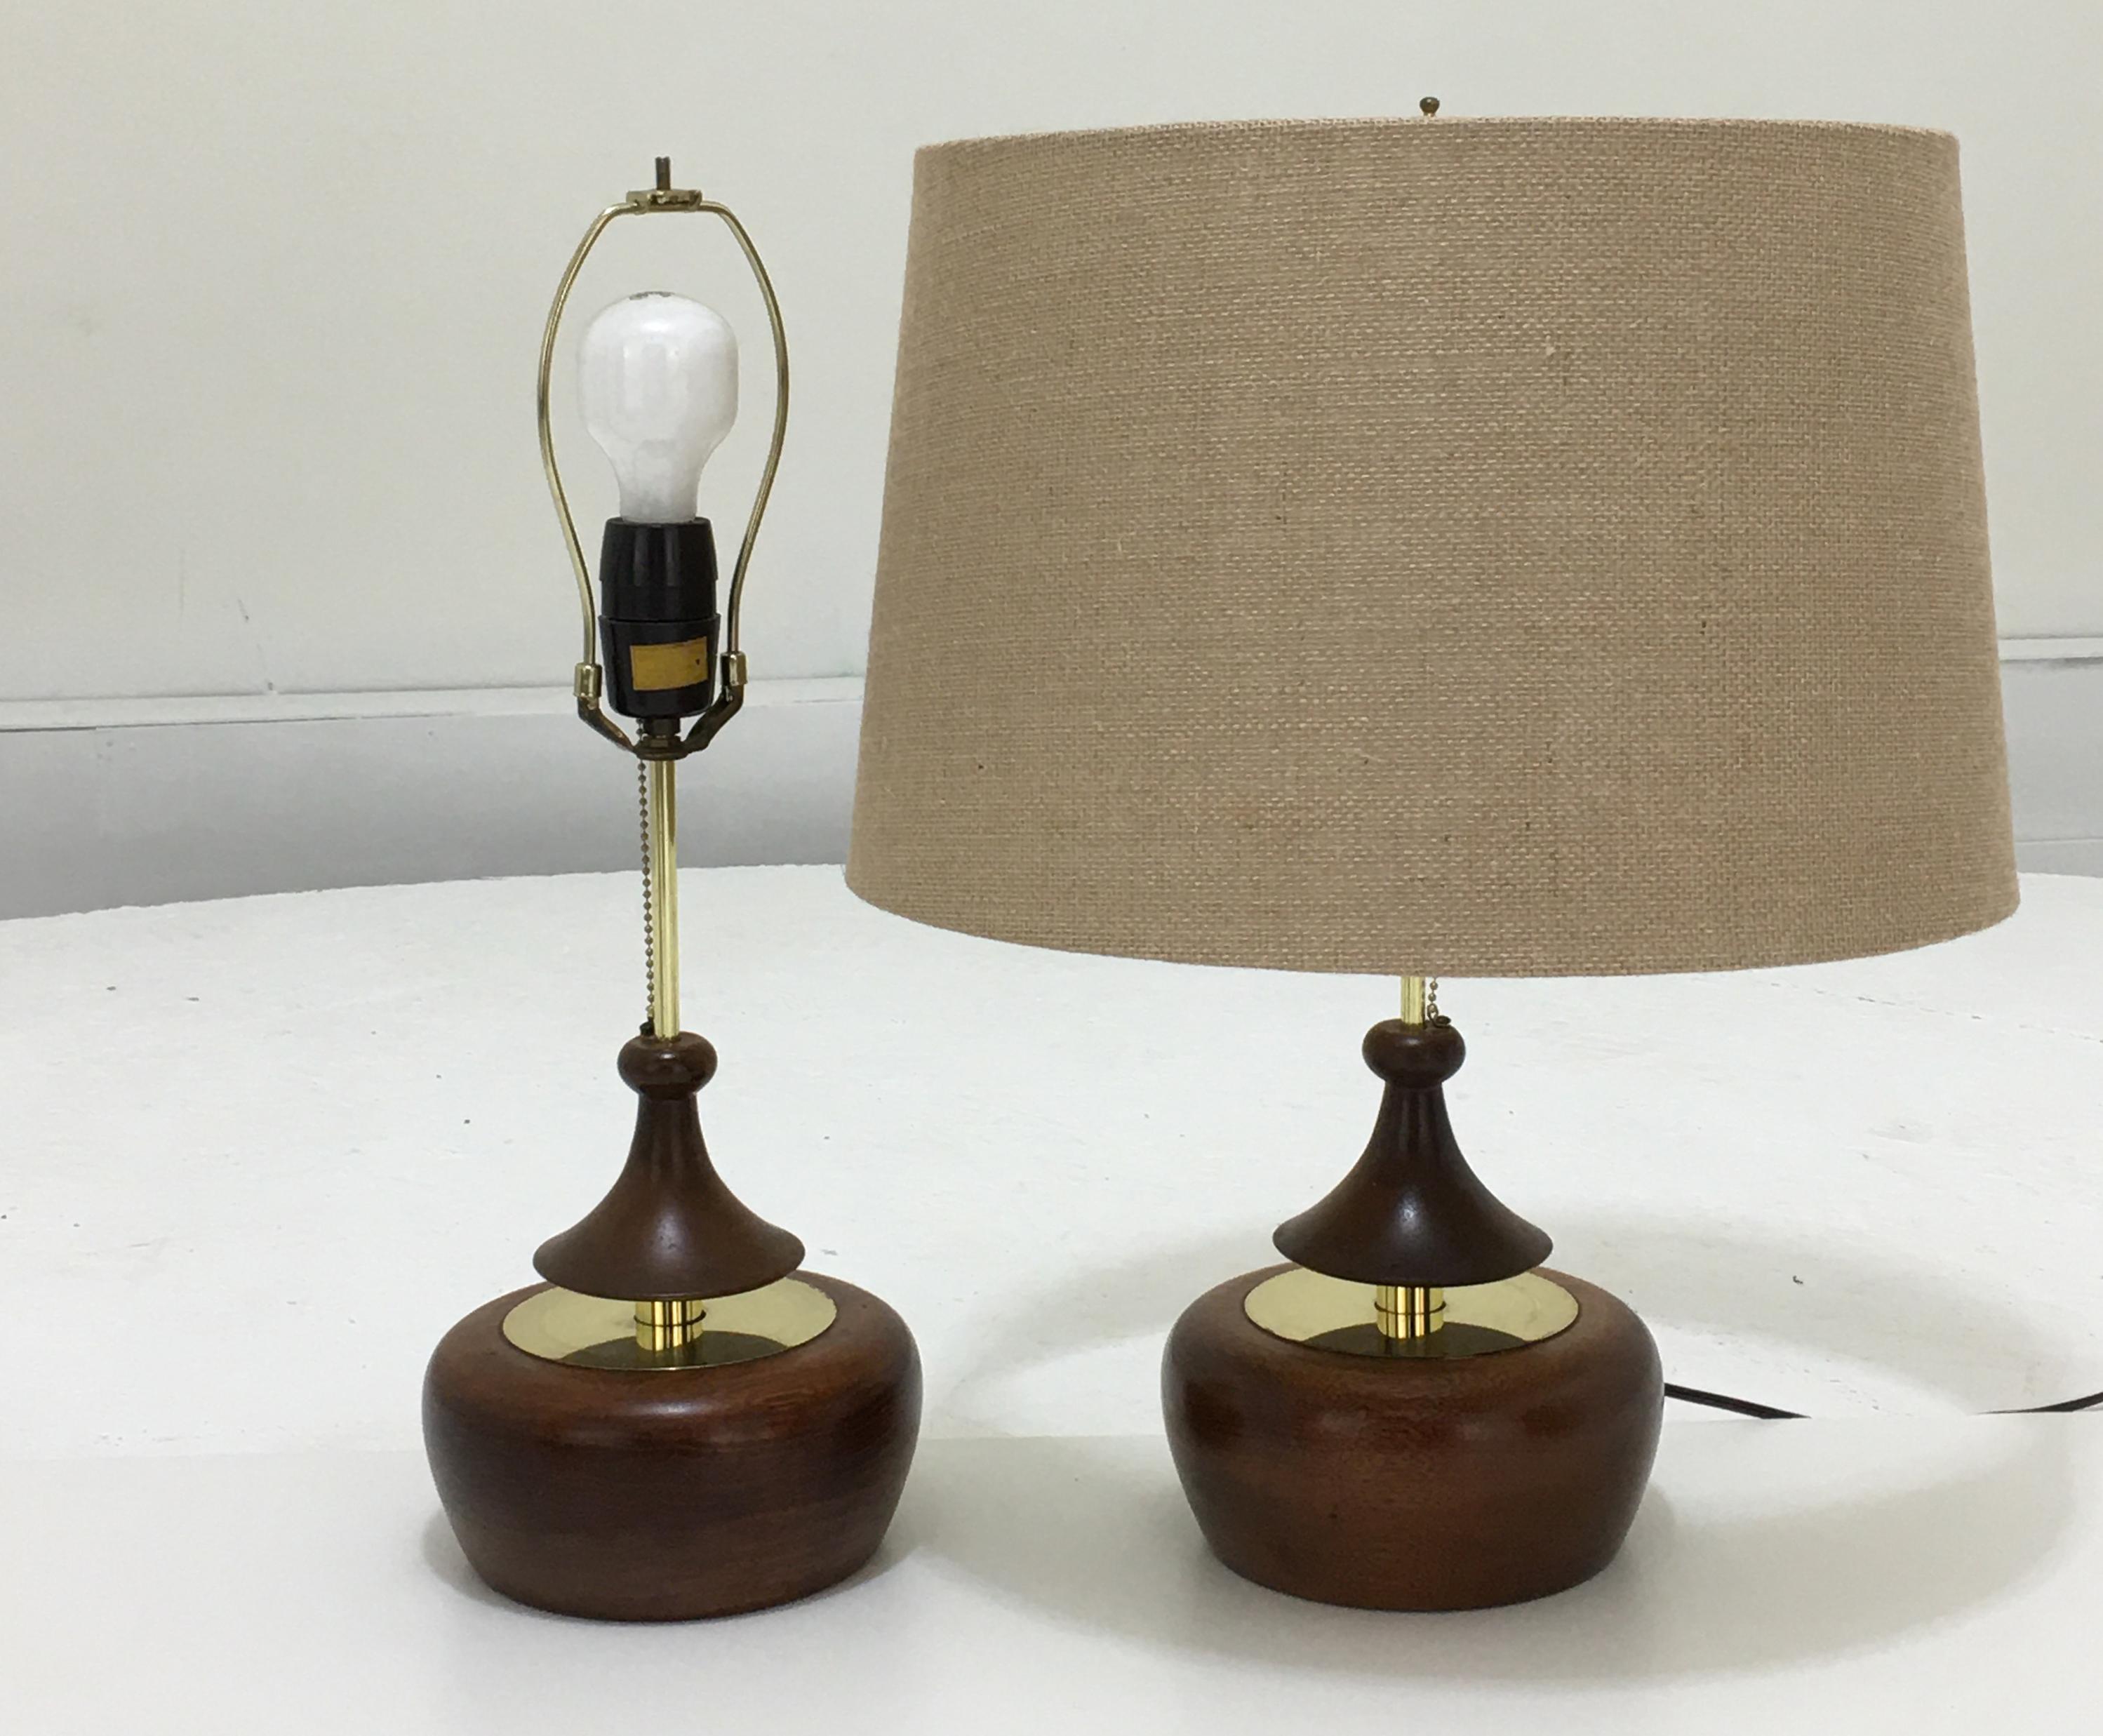 Modeline, California, USA circa 1960, each lamp 7.5 wide and 22 inches tall.
Modeline of California was a creative company located in California that specialized in producing Danish style Mid-Century Modern lamps from teak, walnut and Myrtle wood.